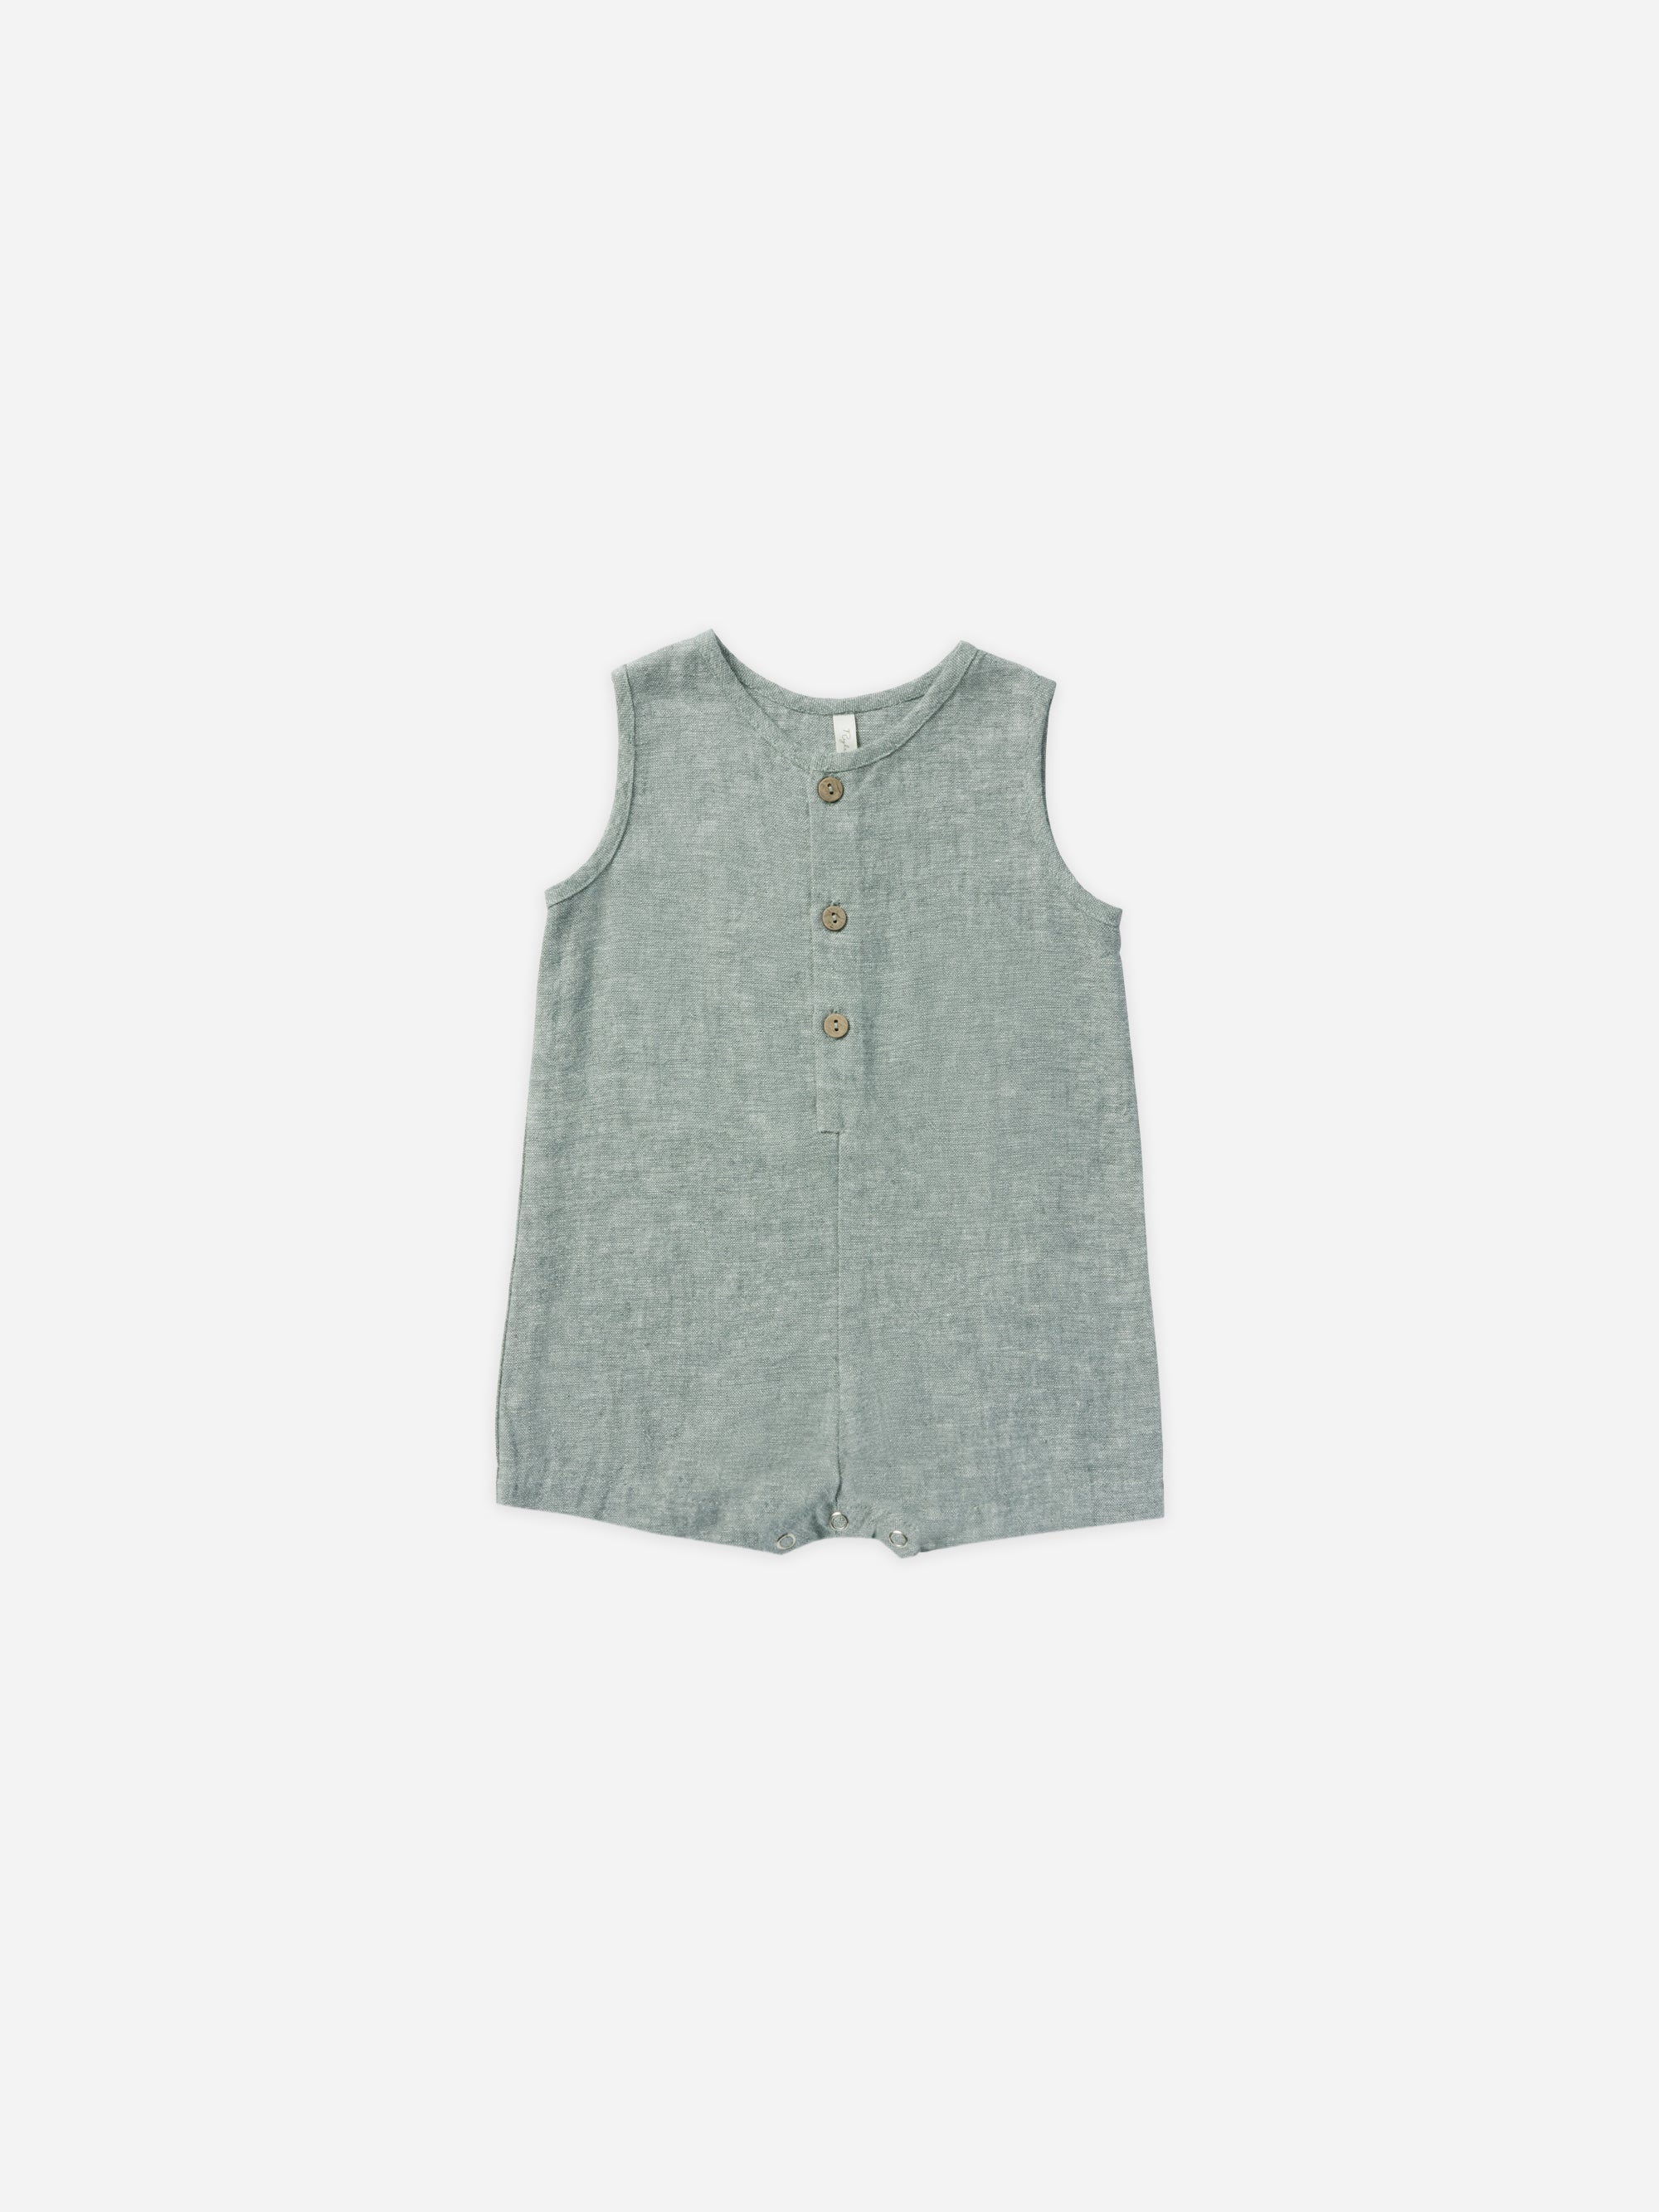 Maverick Romper || Heathered Indigo - Rylee + Cru | Kids Clothes | Trendy Baby Clothes | Modern Infant Outfits |